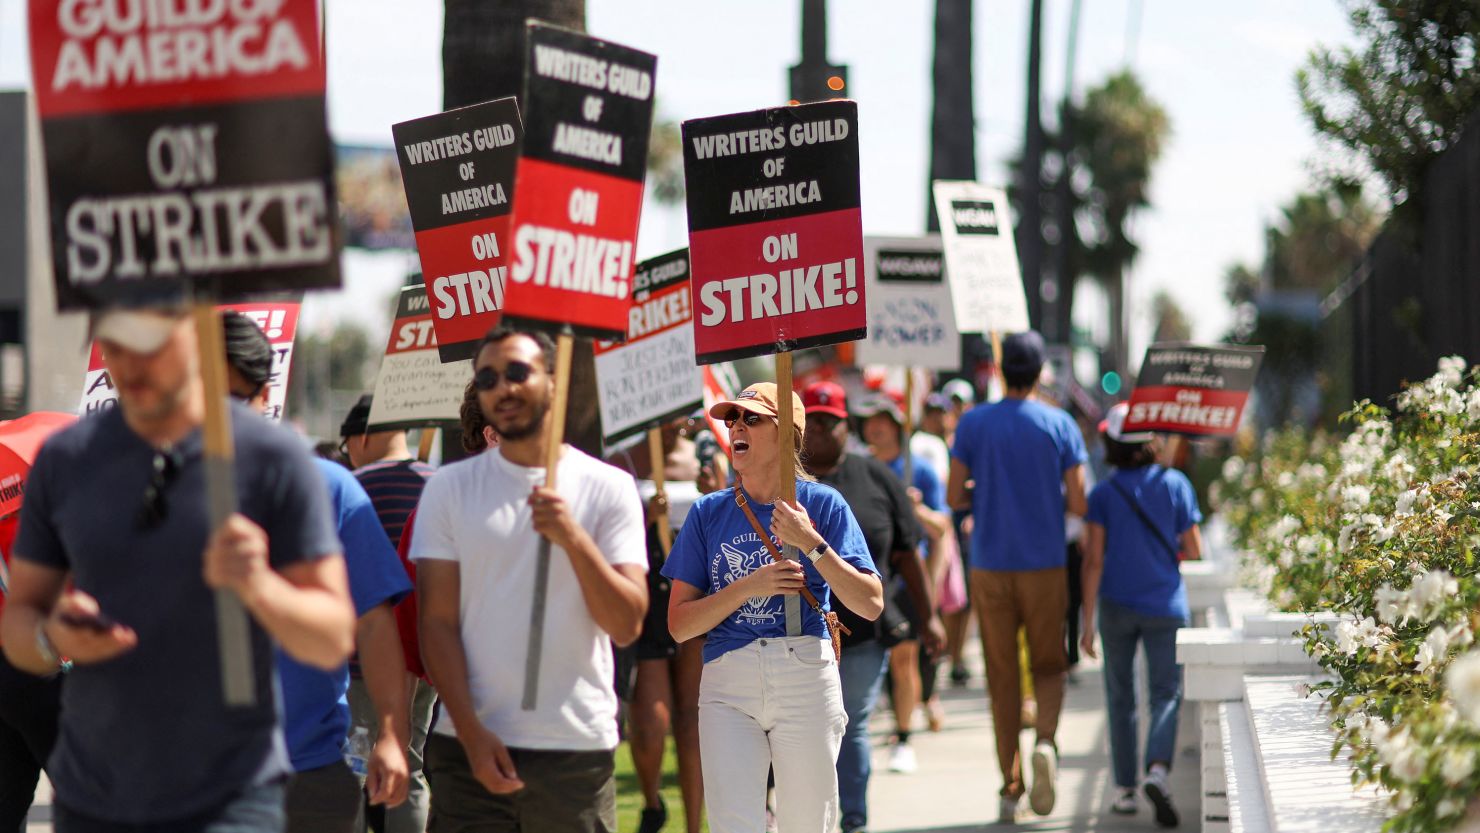 SAG-AFTRA actors and Writers Guild of America writers walk the picket line during their strike outside Netflix offices in Los Angeles earlier this month.